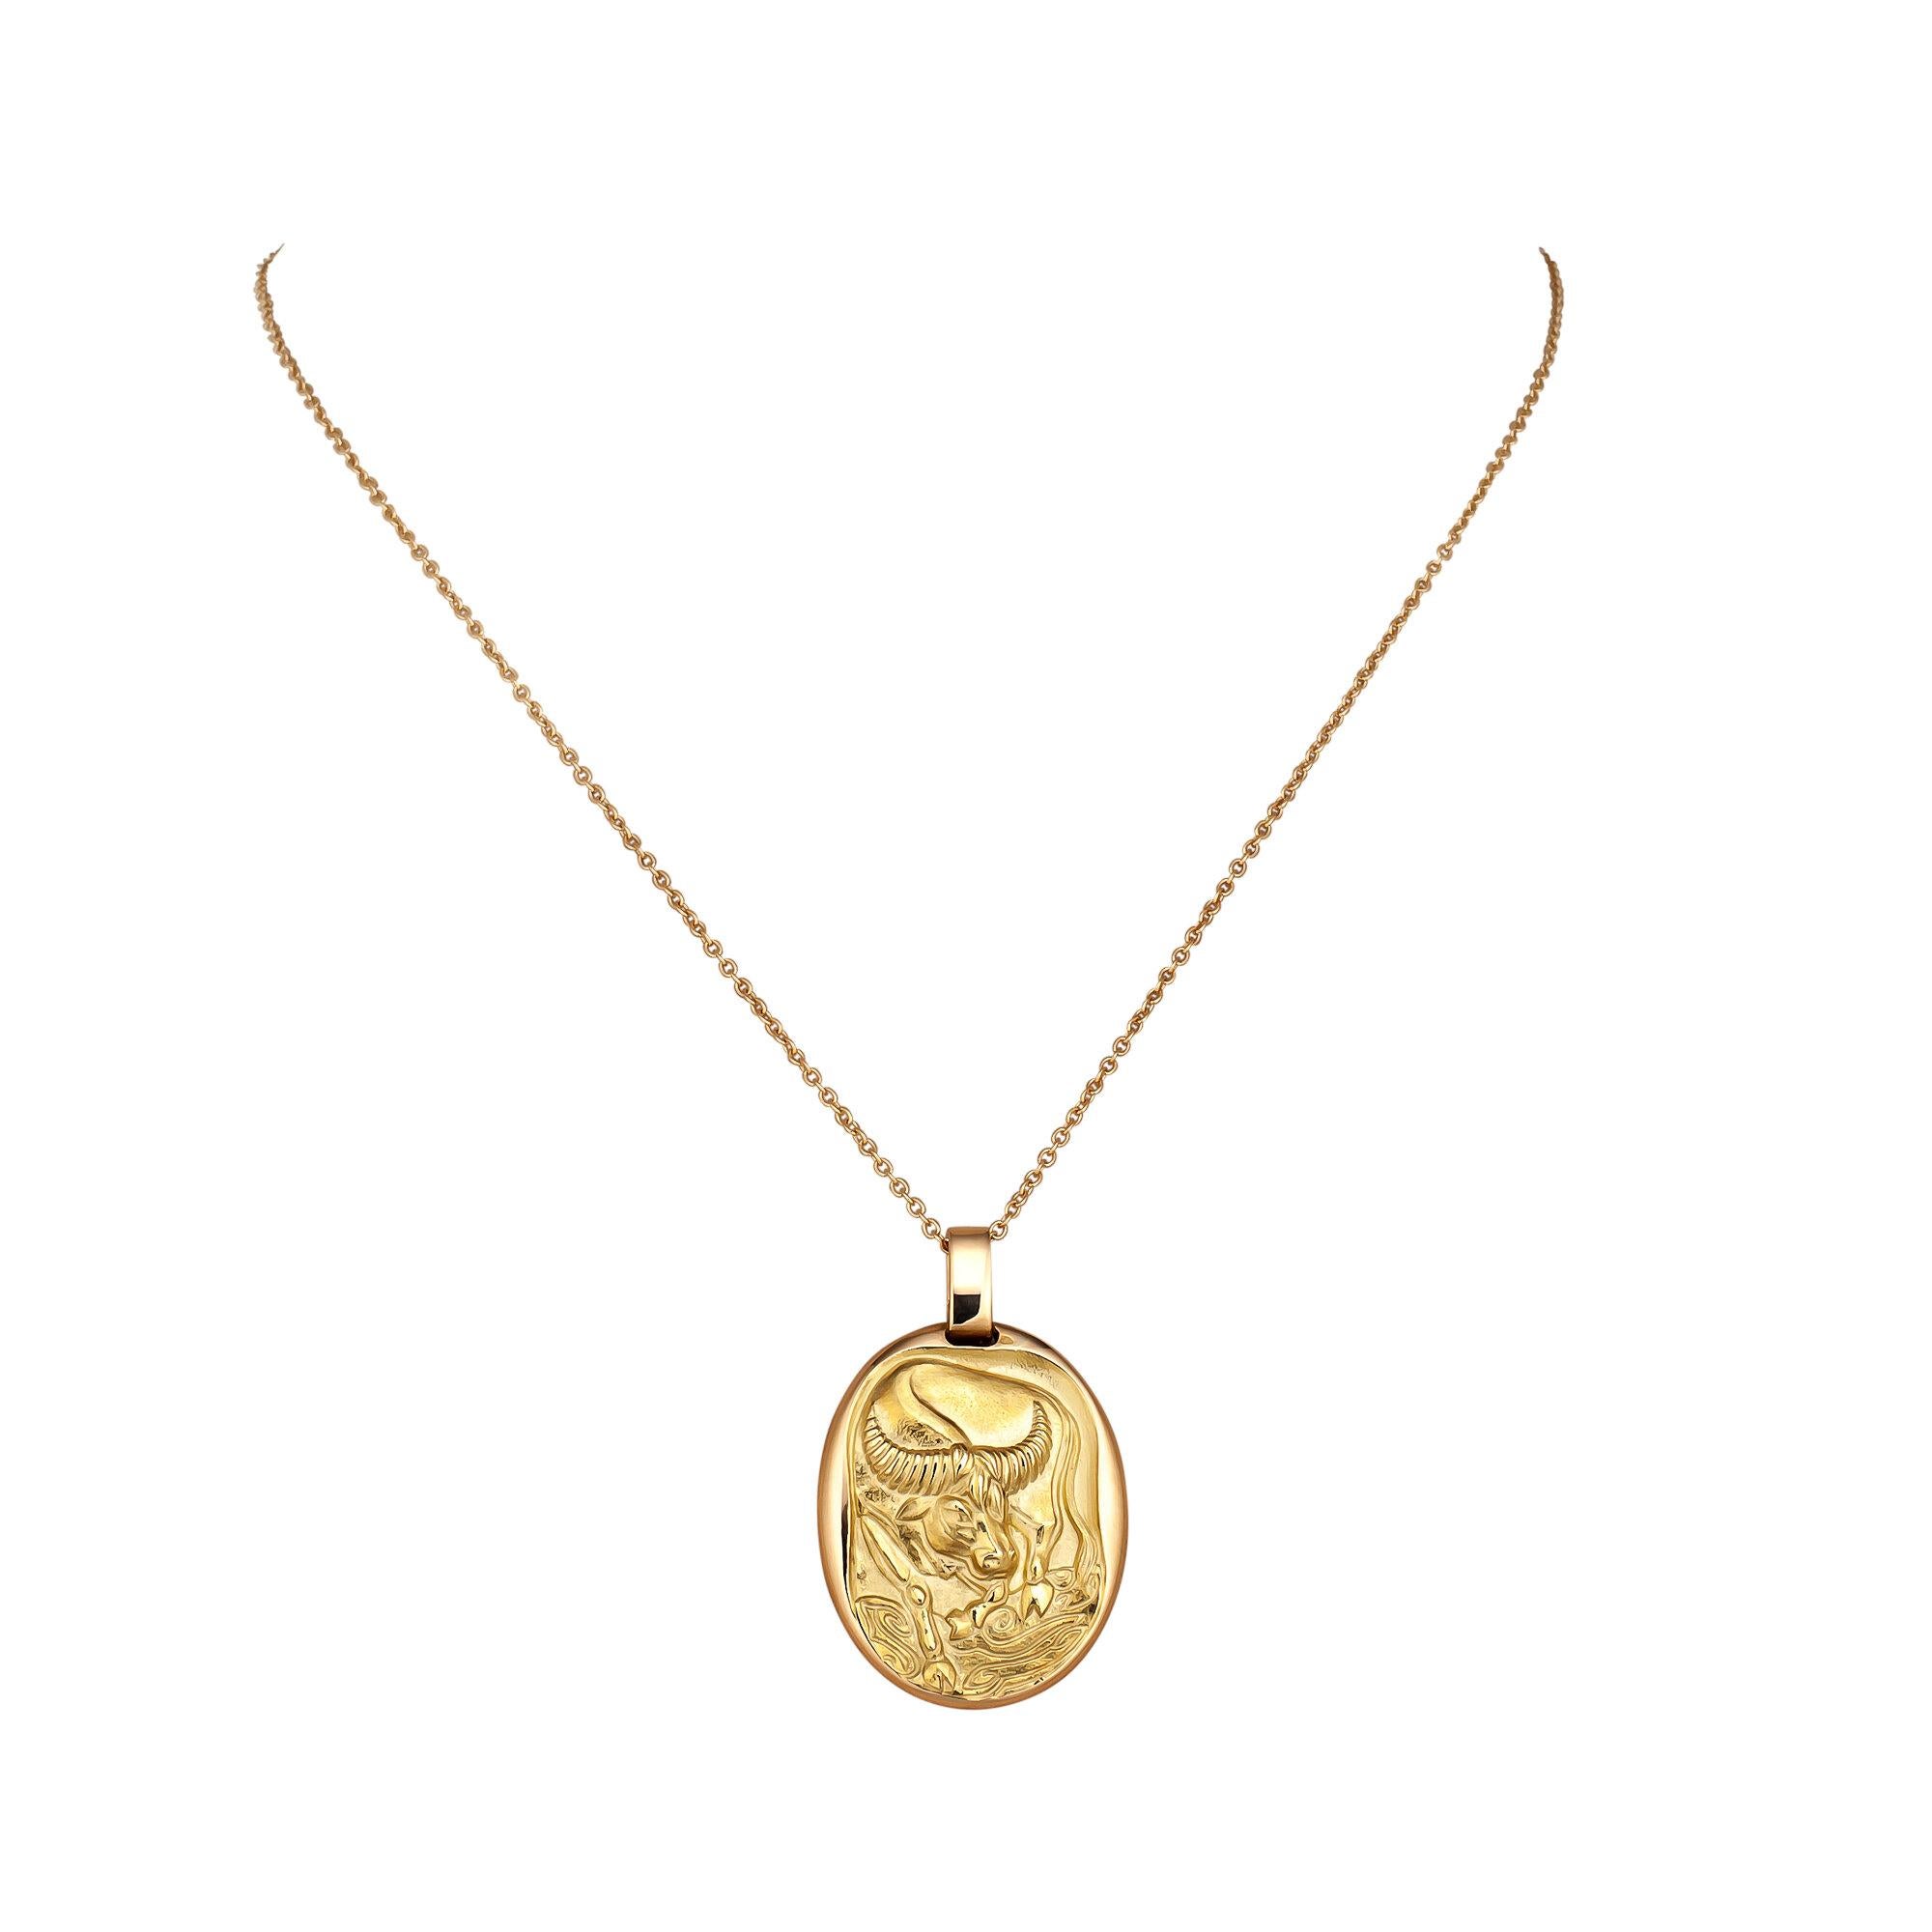 This Cartier Paris vintage Taurus zodiac gold pendant charm celebrates those born between April 19th and May 20th.  With the bull as the Taurus symbol sculpted on the front, this pendant charm represents that animal's stability, endurance, and